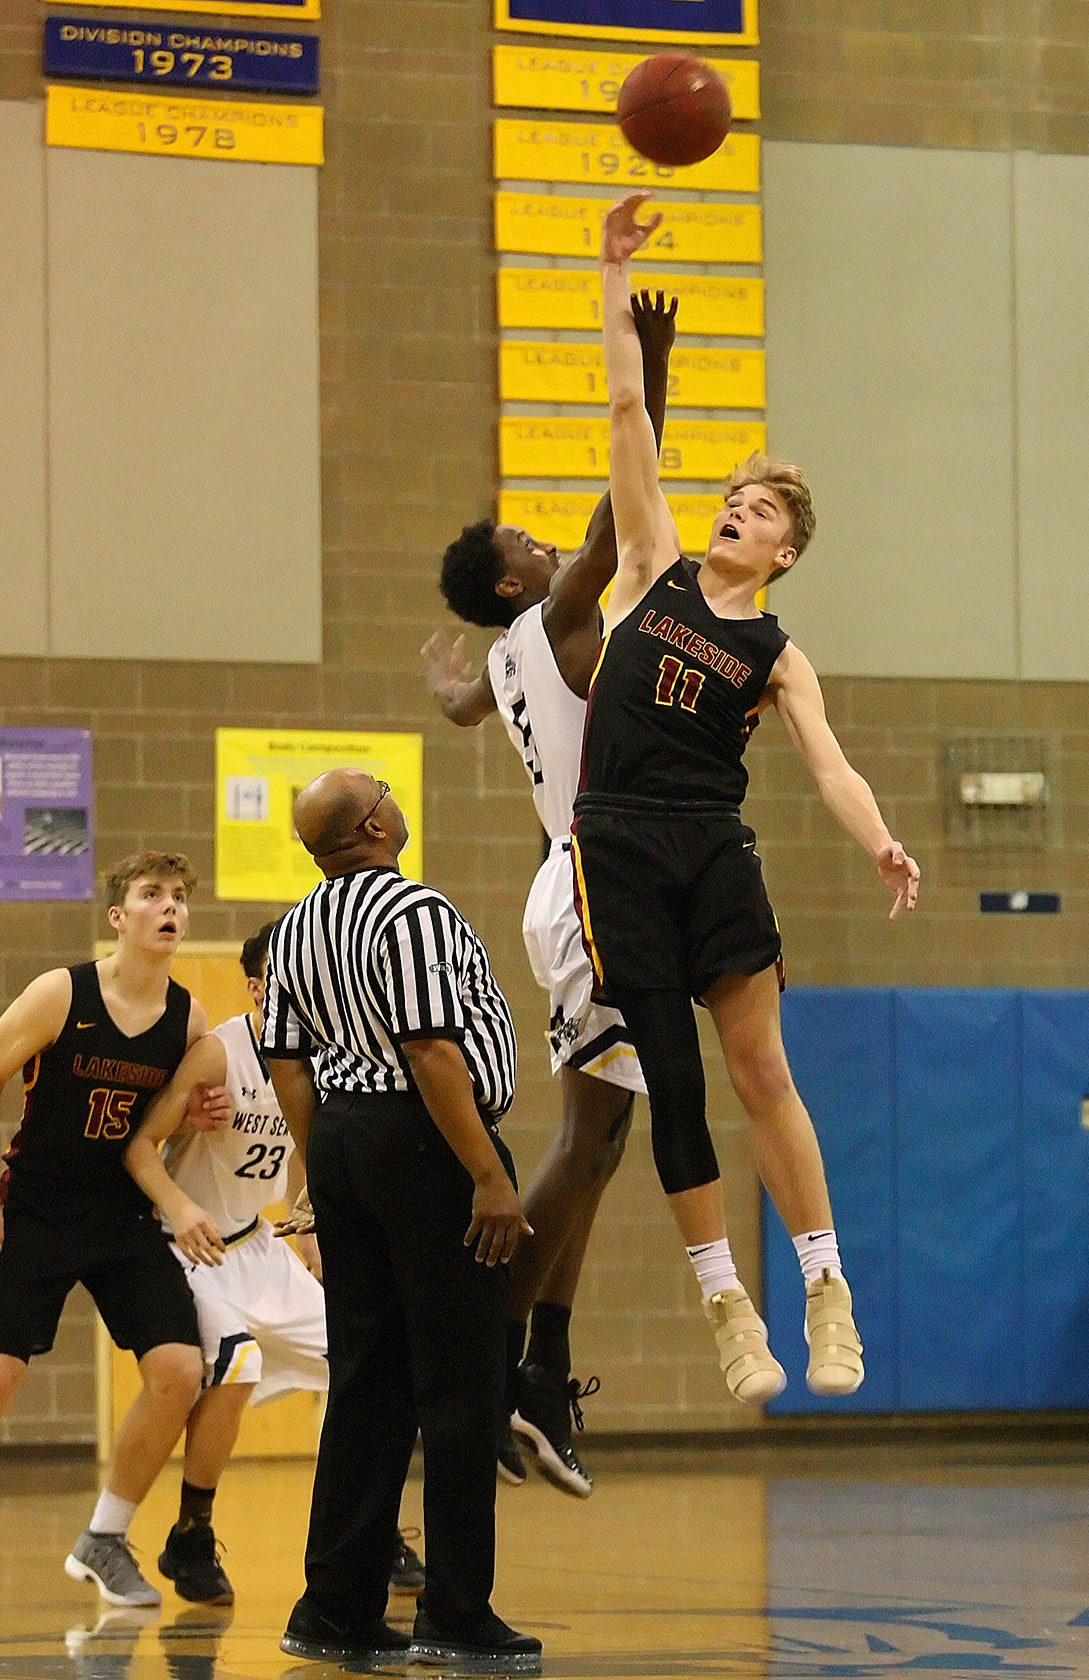 Abdullahi Mohamed of West Seattle jumps against Lakeside's Max Knight on the opening tip.